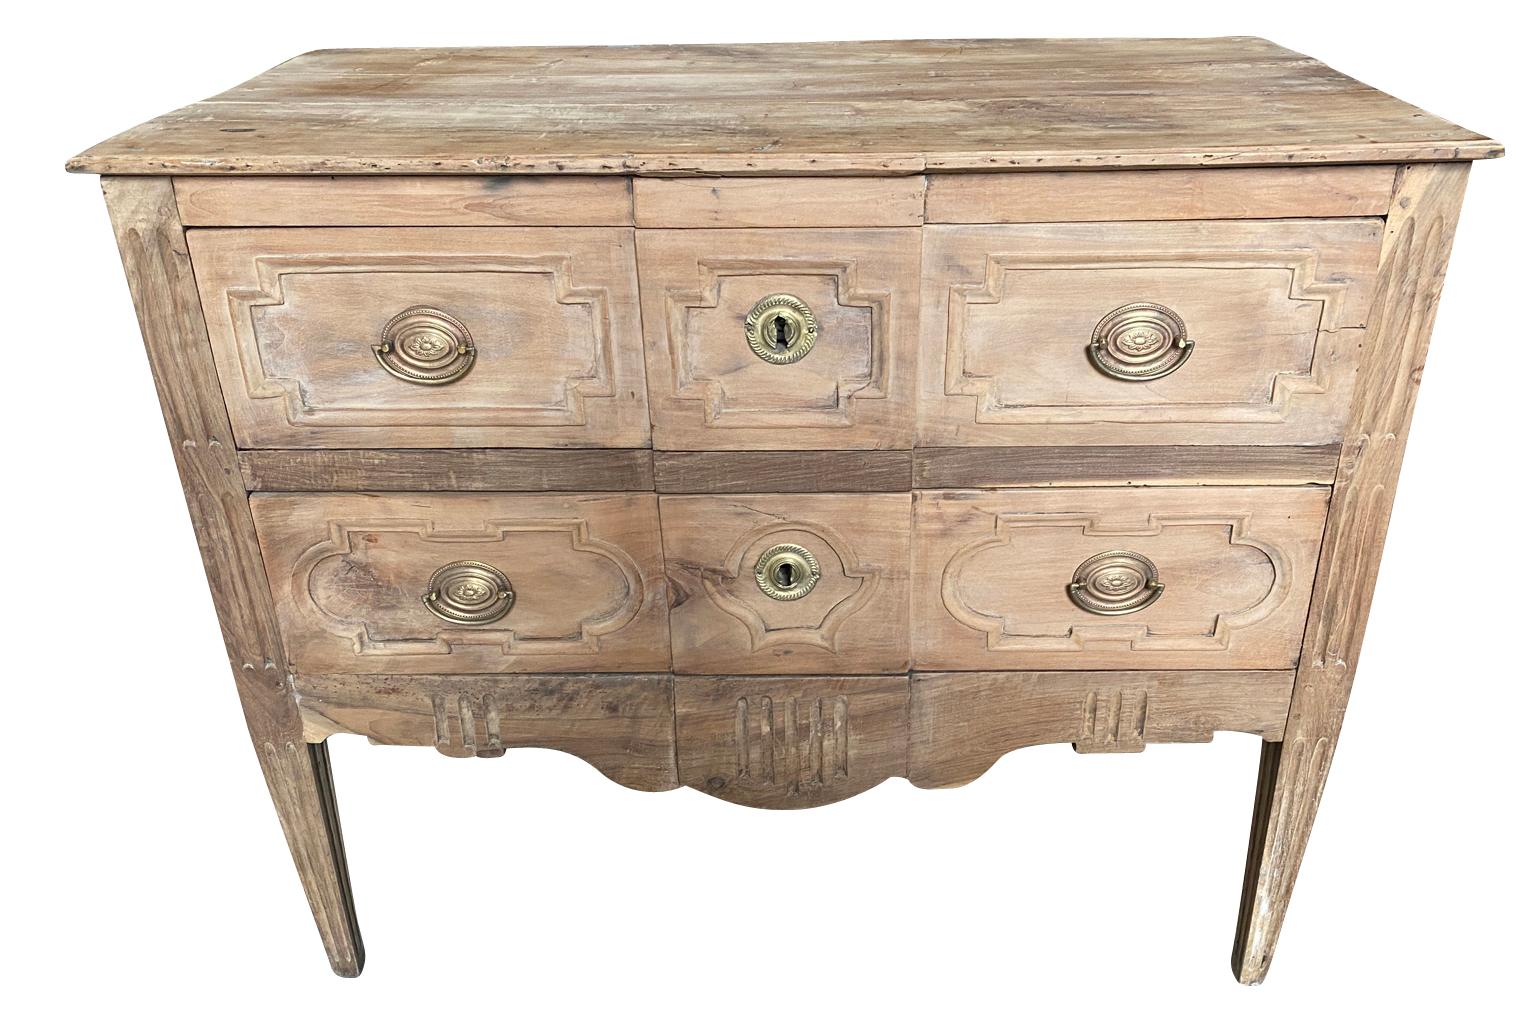 A very lovely Louis XVI period Sauteuse commode from the Provence region of France. Beautifully constructed from walnut having 2 drawers with carved fascias over tapered legs. Perfect as a bedside cabinet or converted into a bathroom vanity.